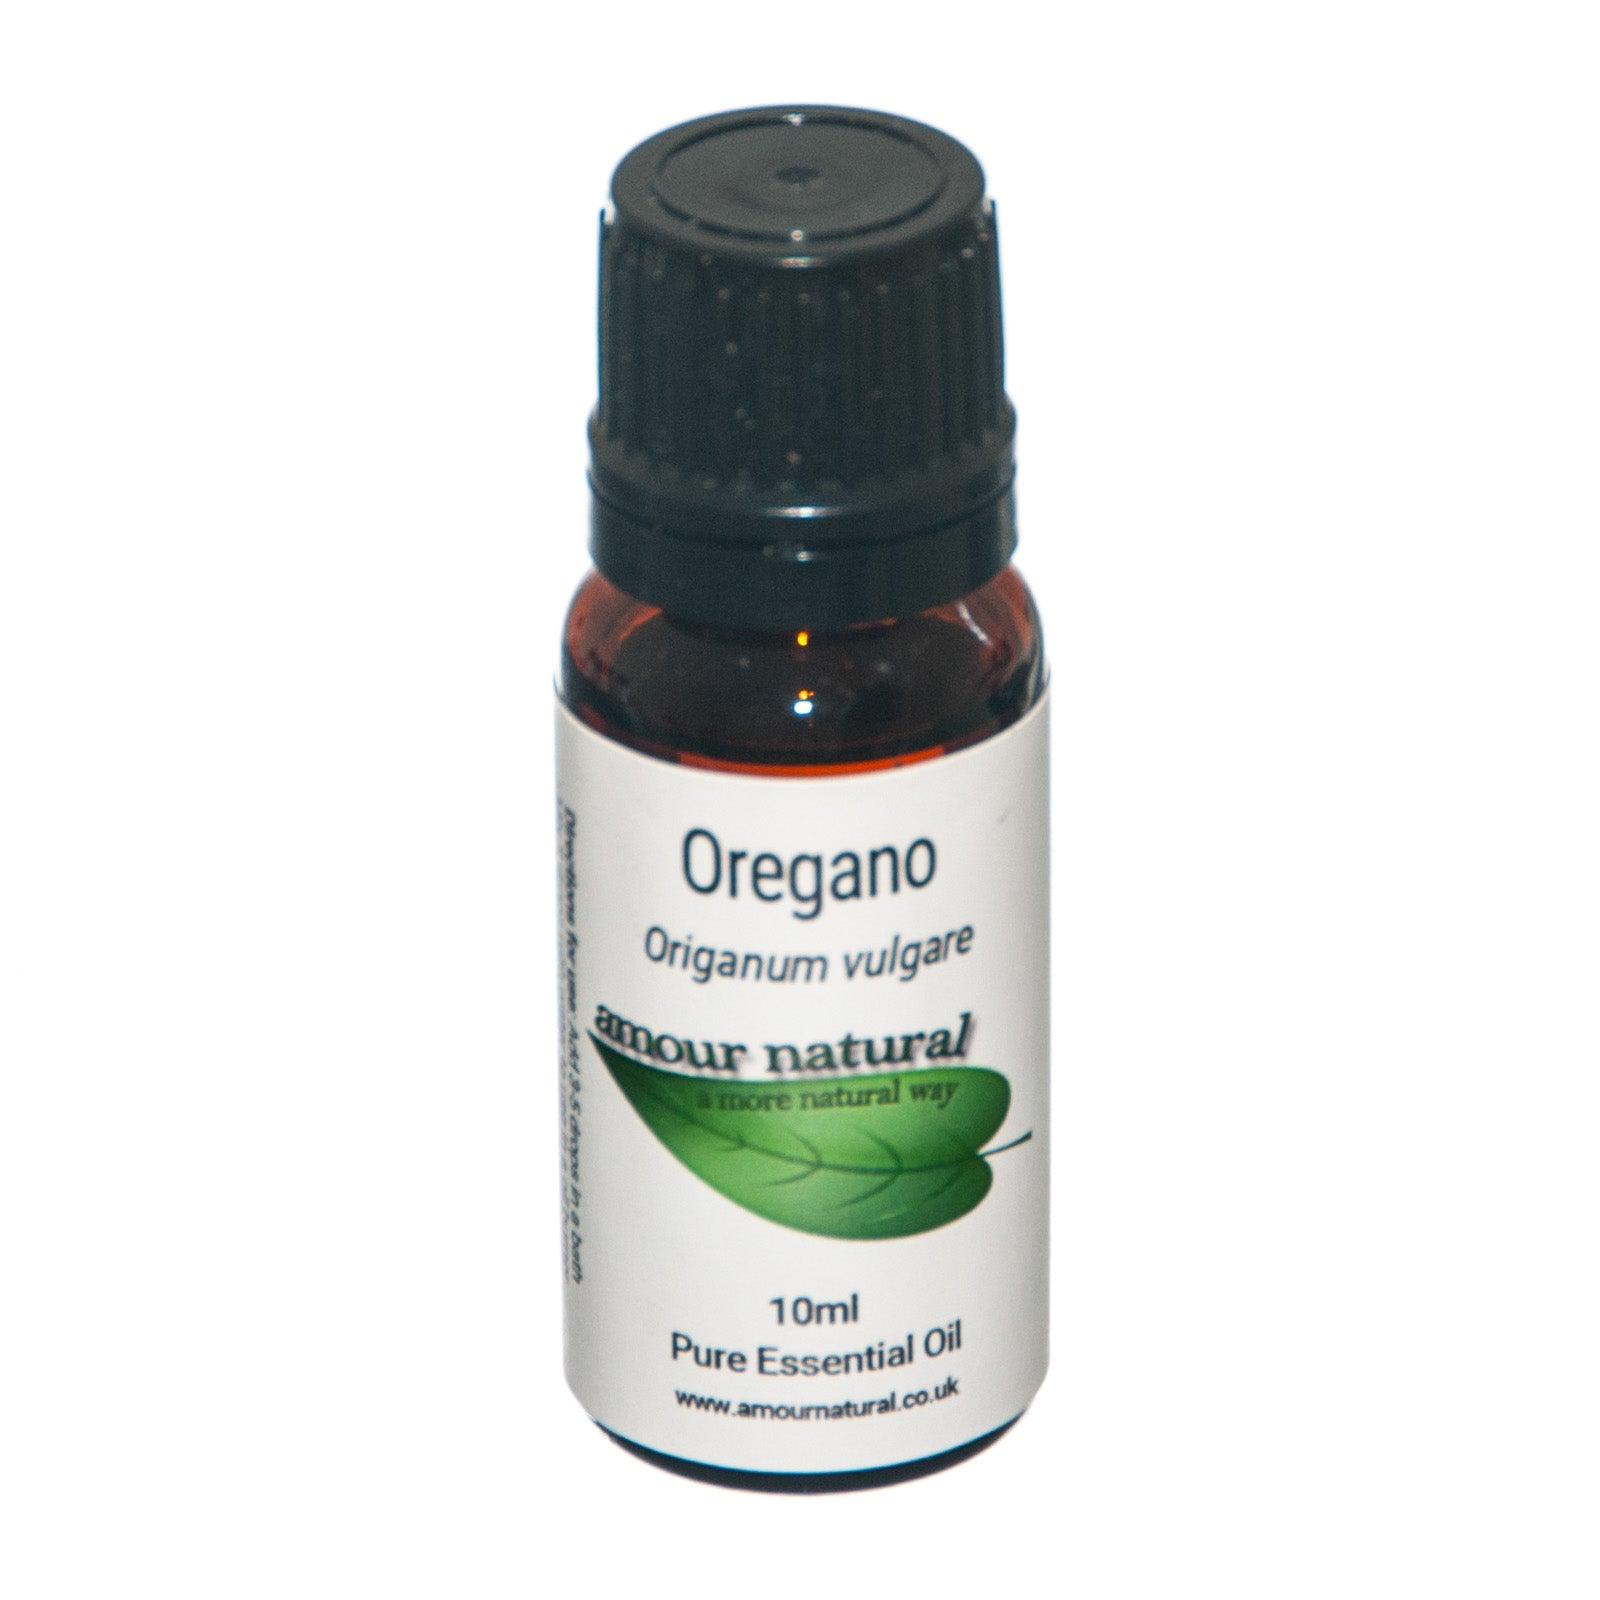 Amour Natural Oregano Oil 10ml - Approved Vitamins